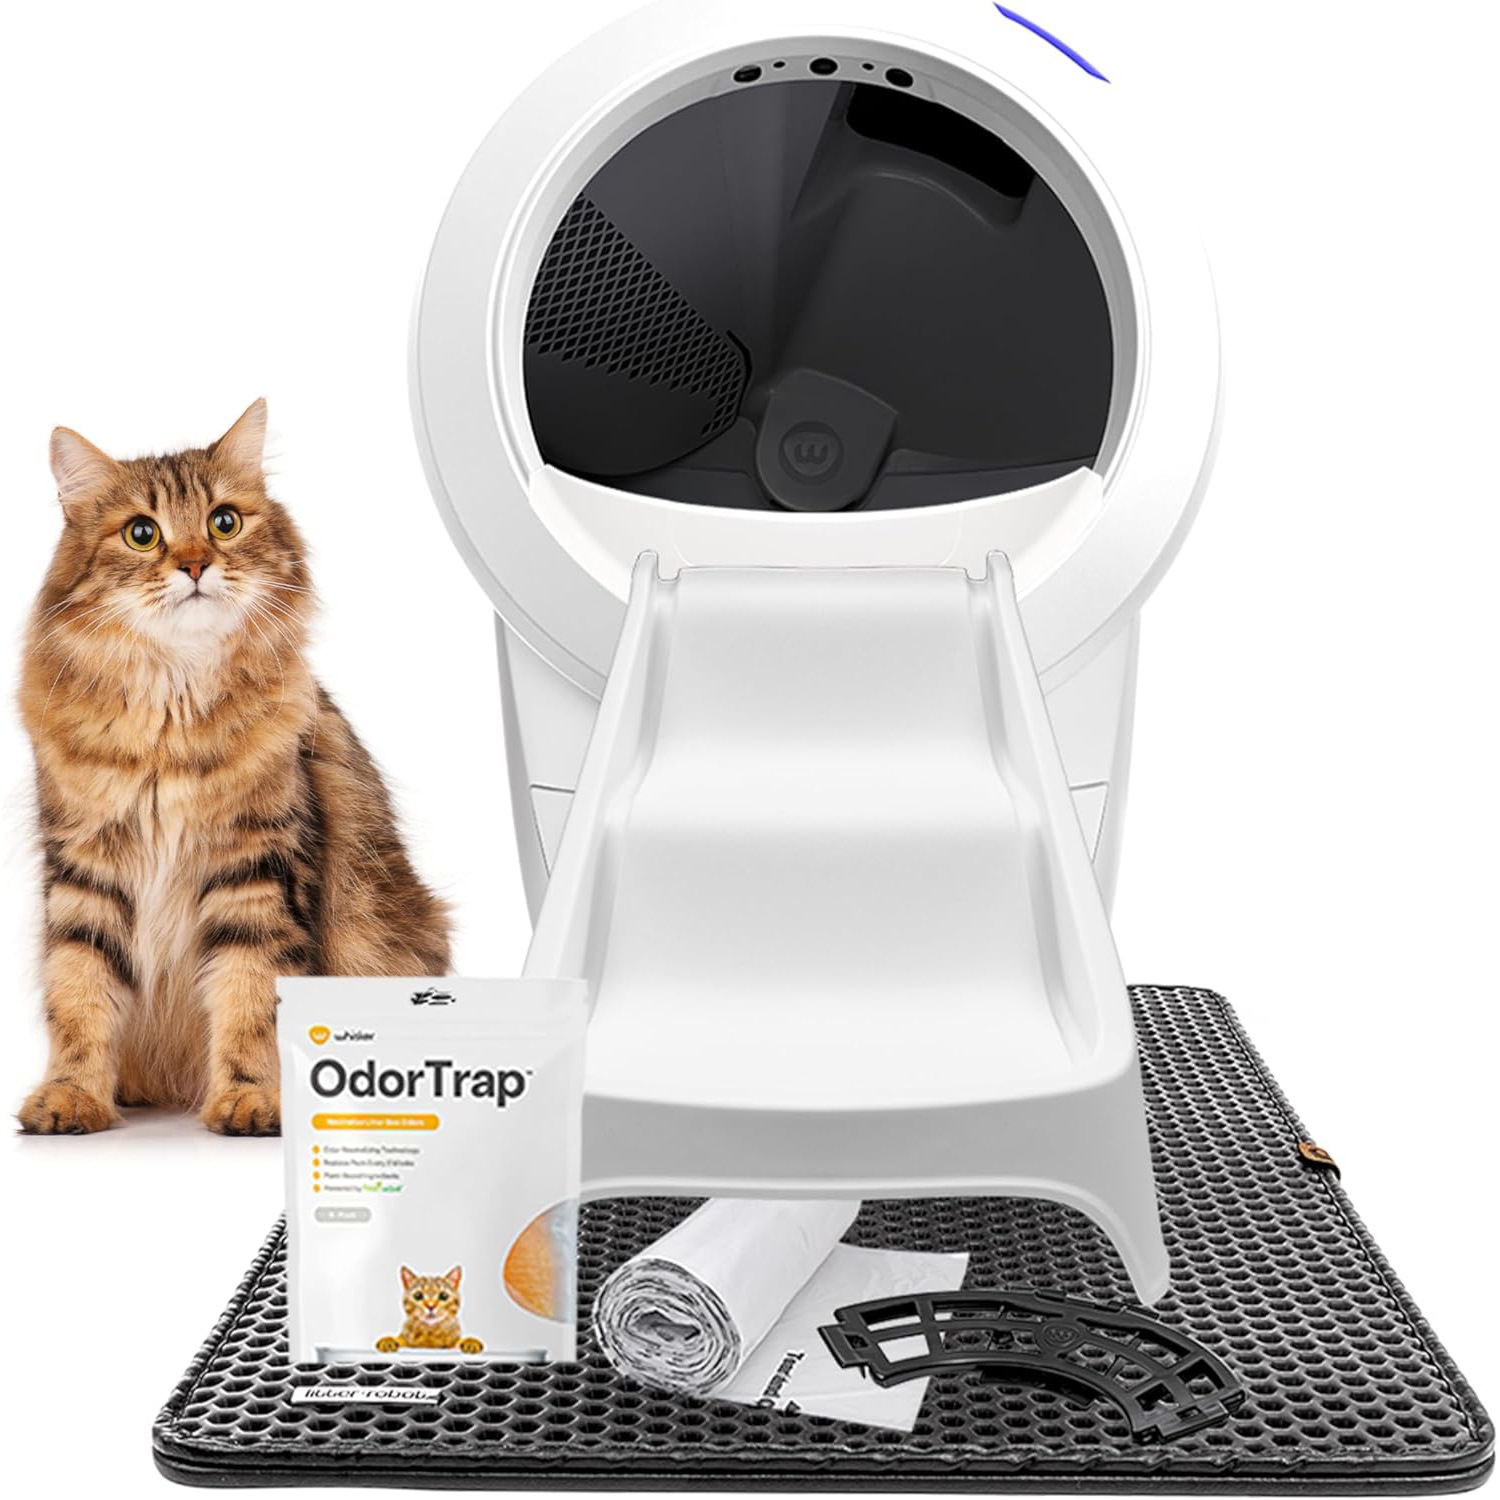 Litter-Robot 4 Bundle by Whisker, White - Automatic, Self-Cleaning Cat Litter Box, Includes Litter-Robot 4, 6 OdorTrap Pack Refills, 50 Waste Drawer Liners, Ramp, Mat & Fence New